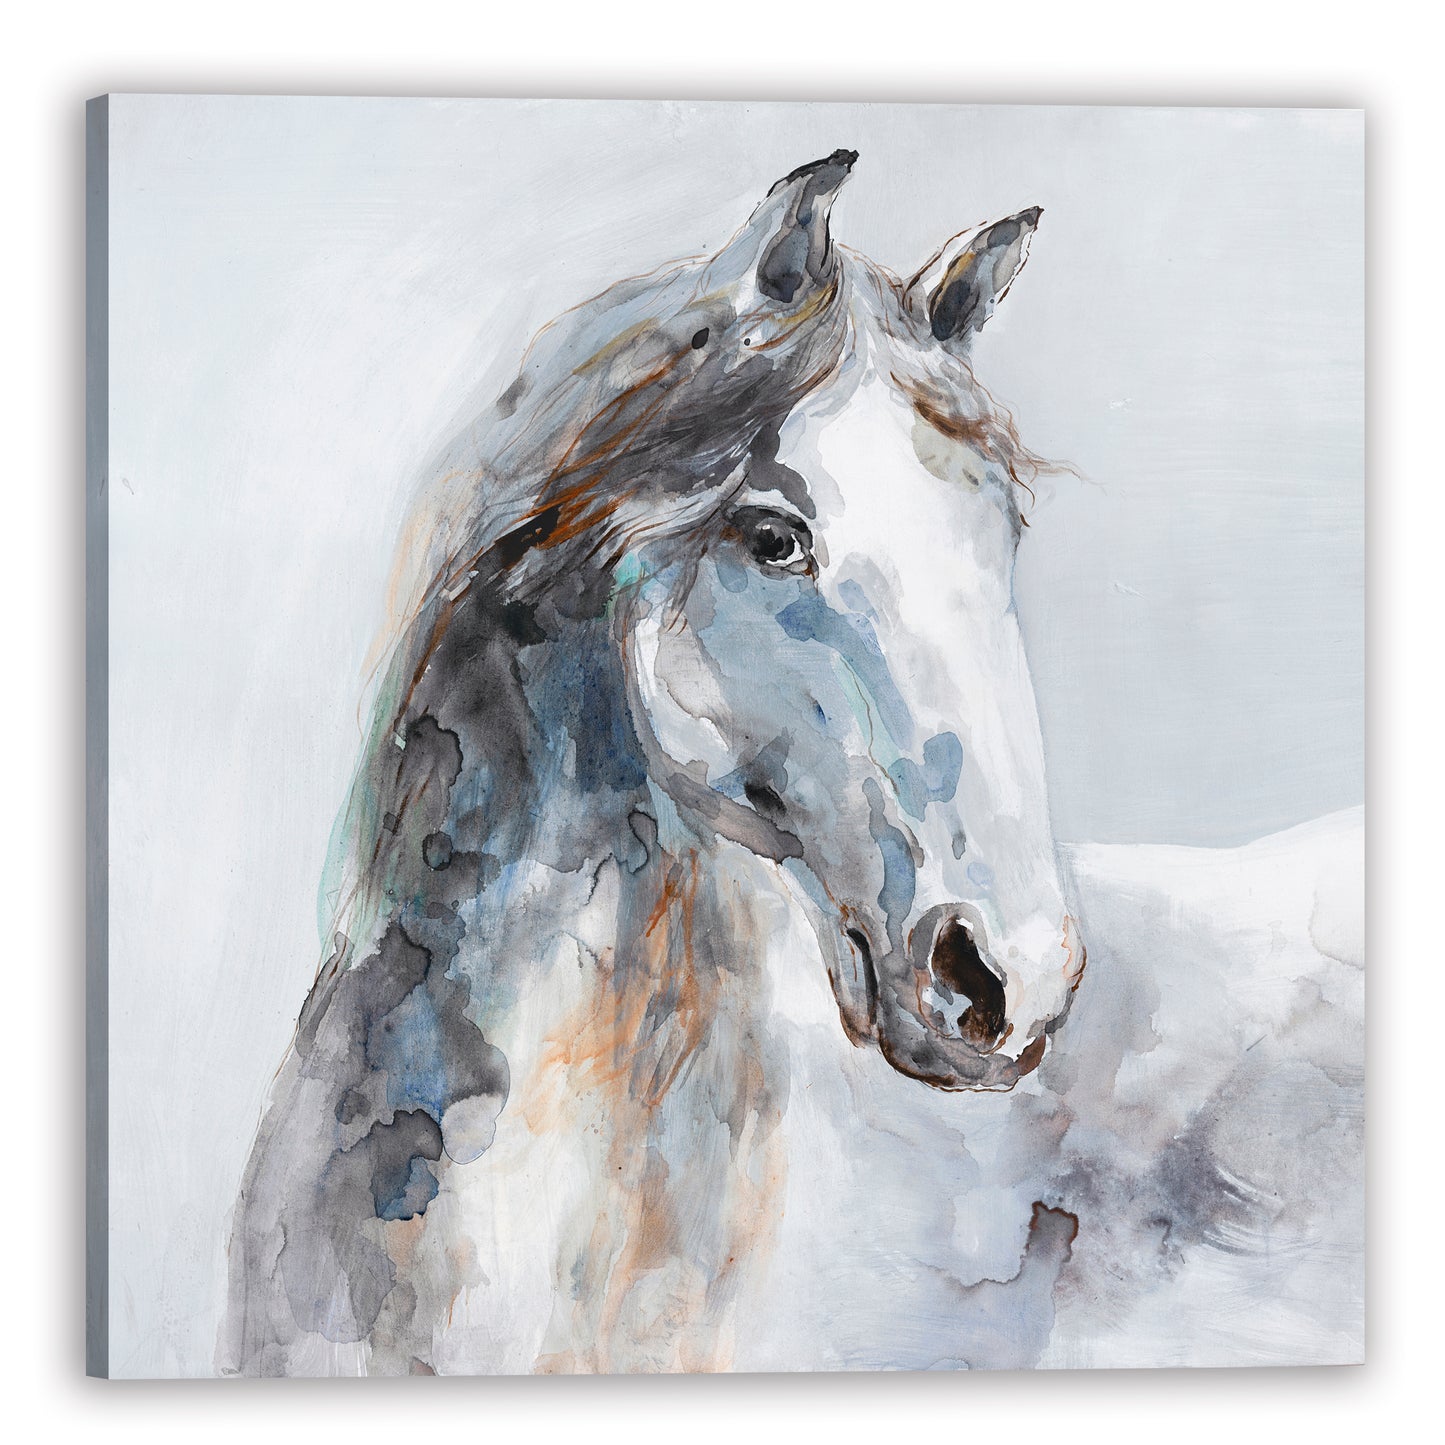 White horse of modern art - Oil Painting on Wrapped Canvas Wall Art.